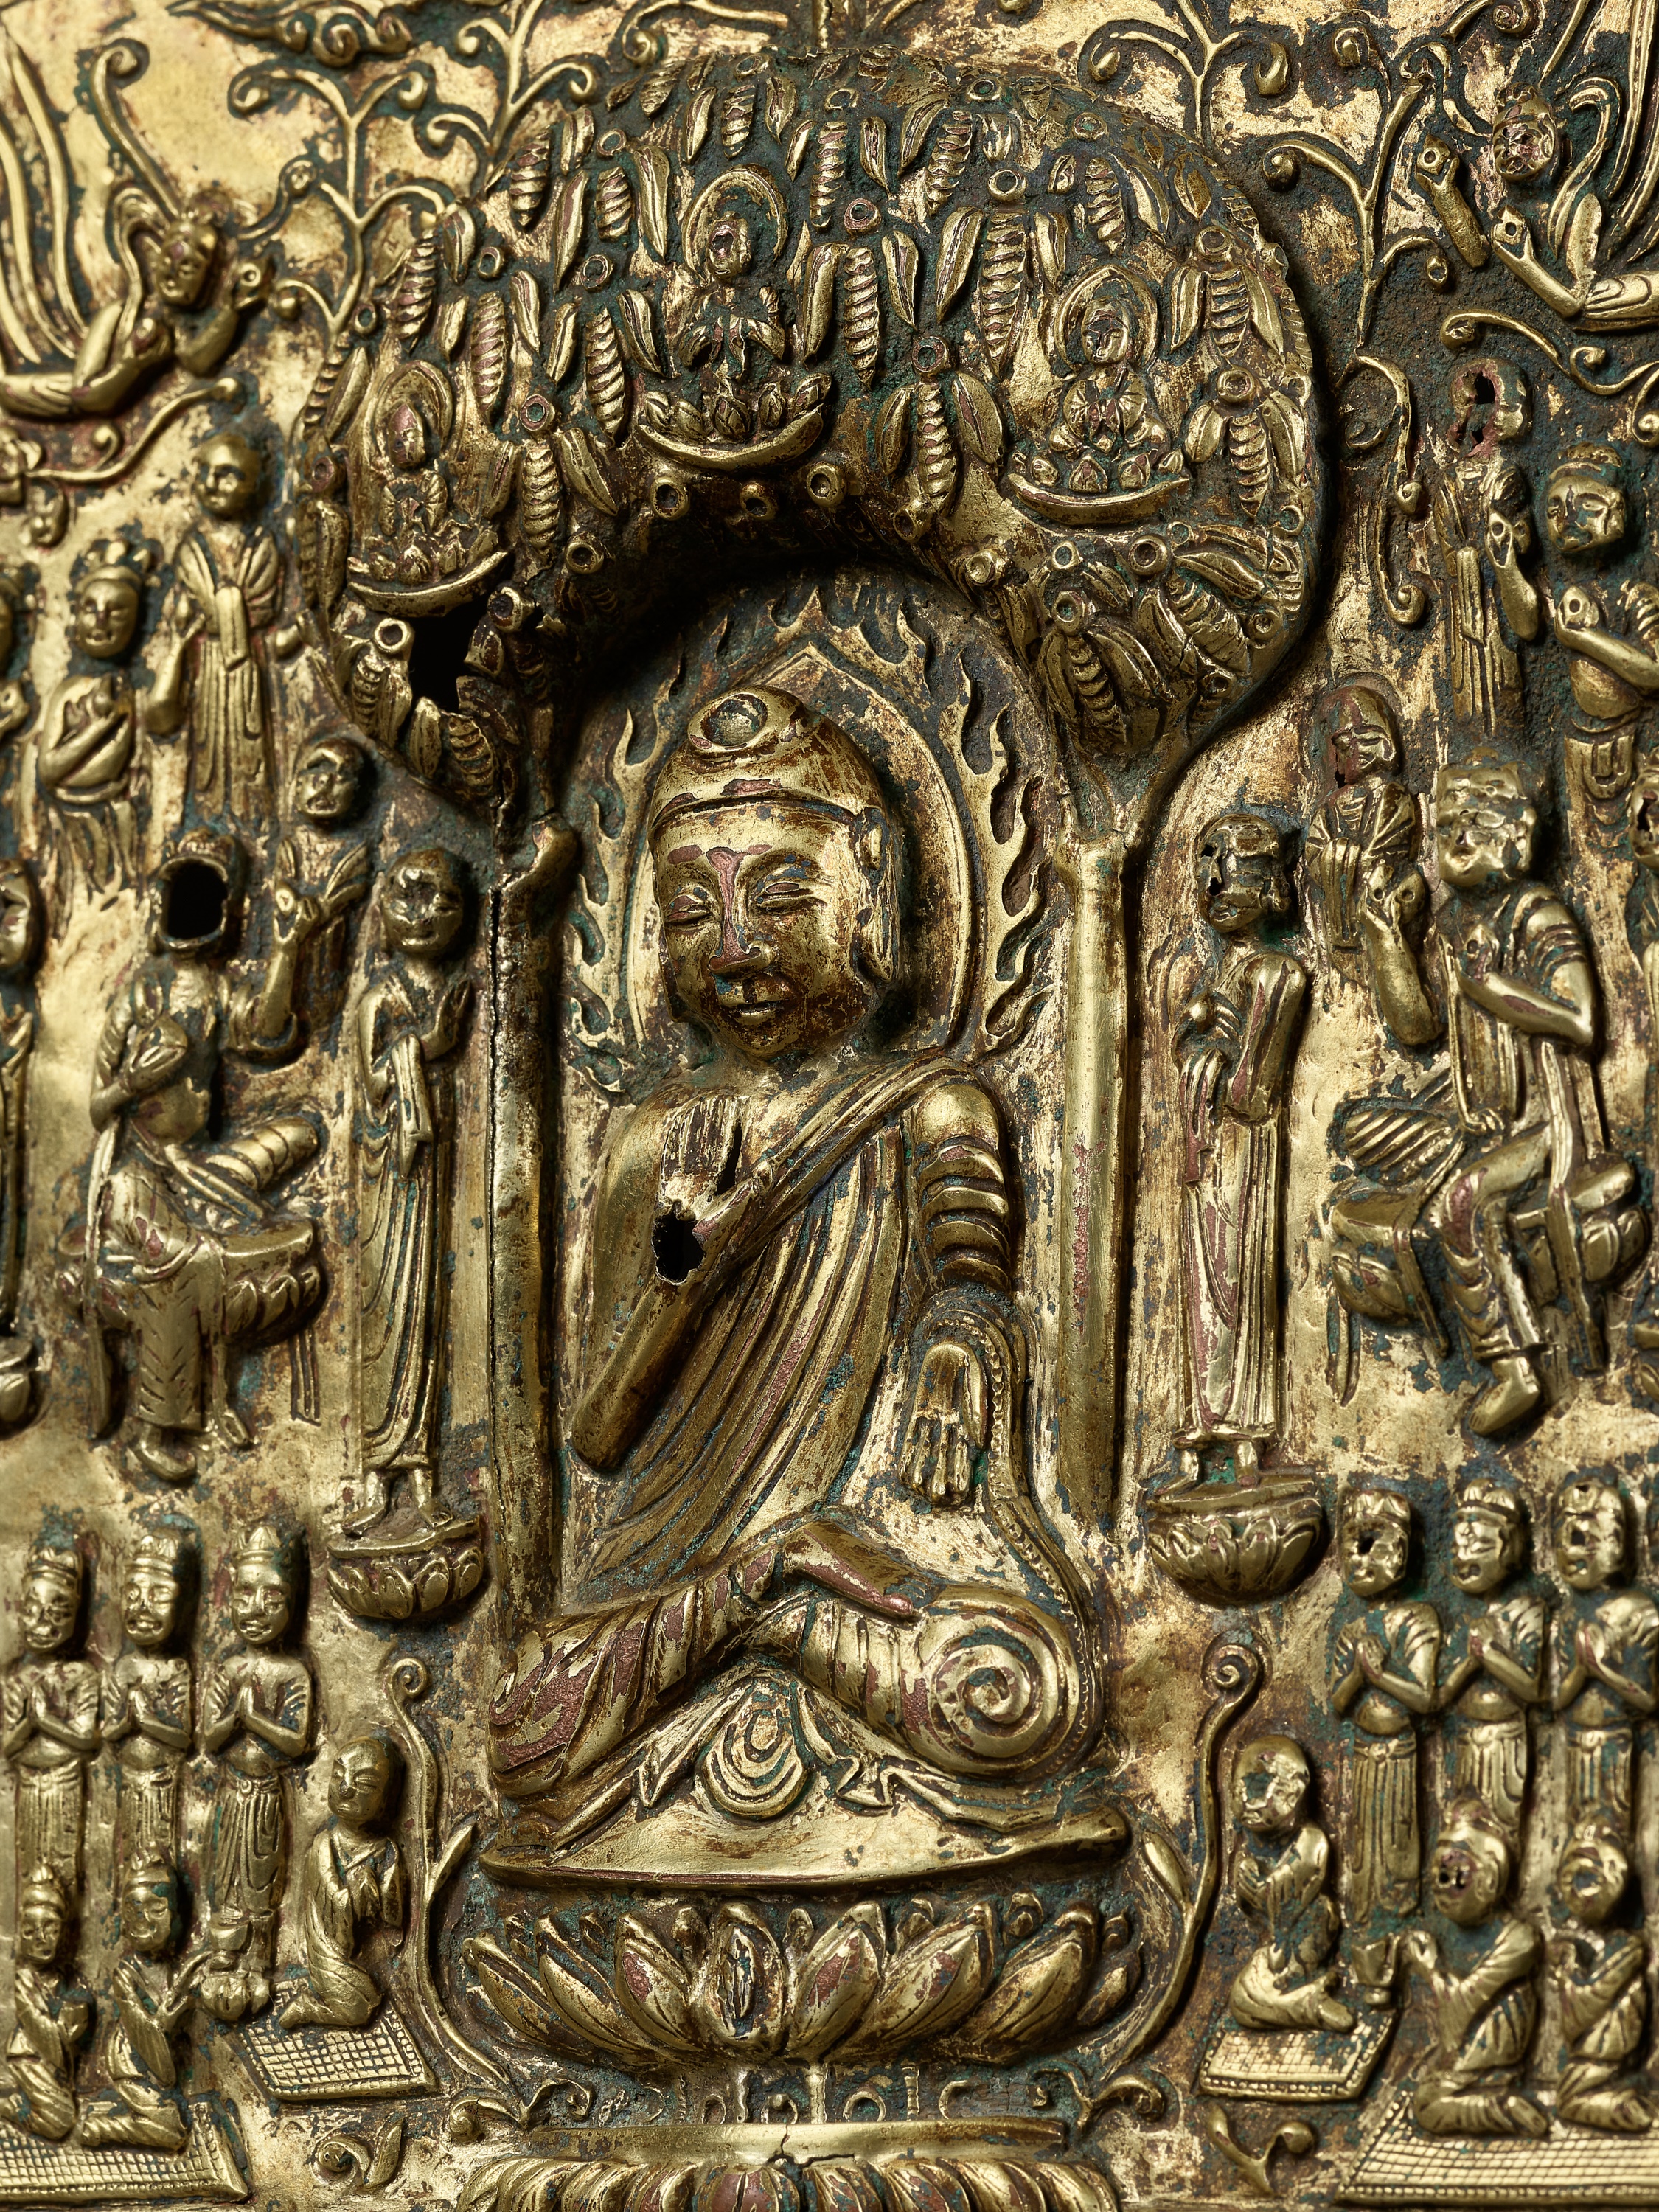 A LARGE AND IMPORTANT BUDDHIST VOTIVE PLAQUE, GILT COPPER REPOUSSE, EARLY TANG DYNASTY - Image 2 of 21